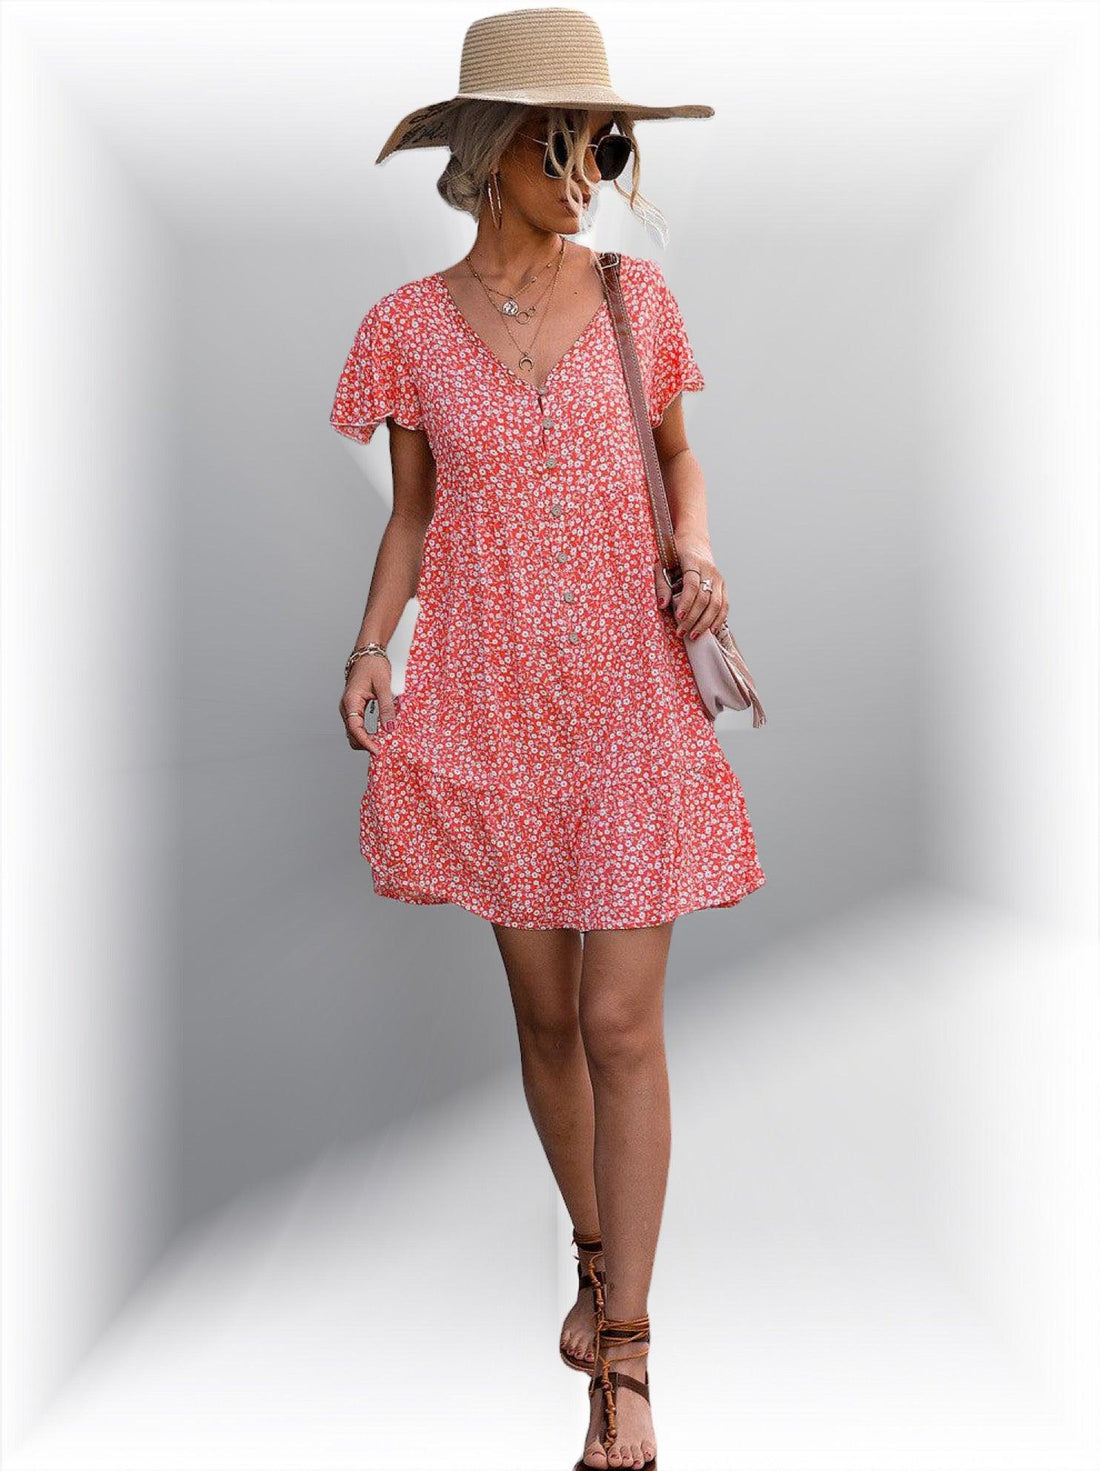 Perfect Spring Look: Floral Buttoned V-Neck Flutter Sleeve Dress - Jewelry Bubble